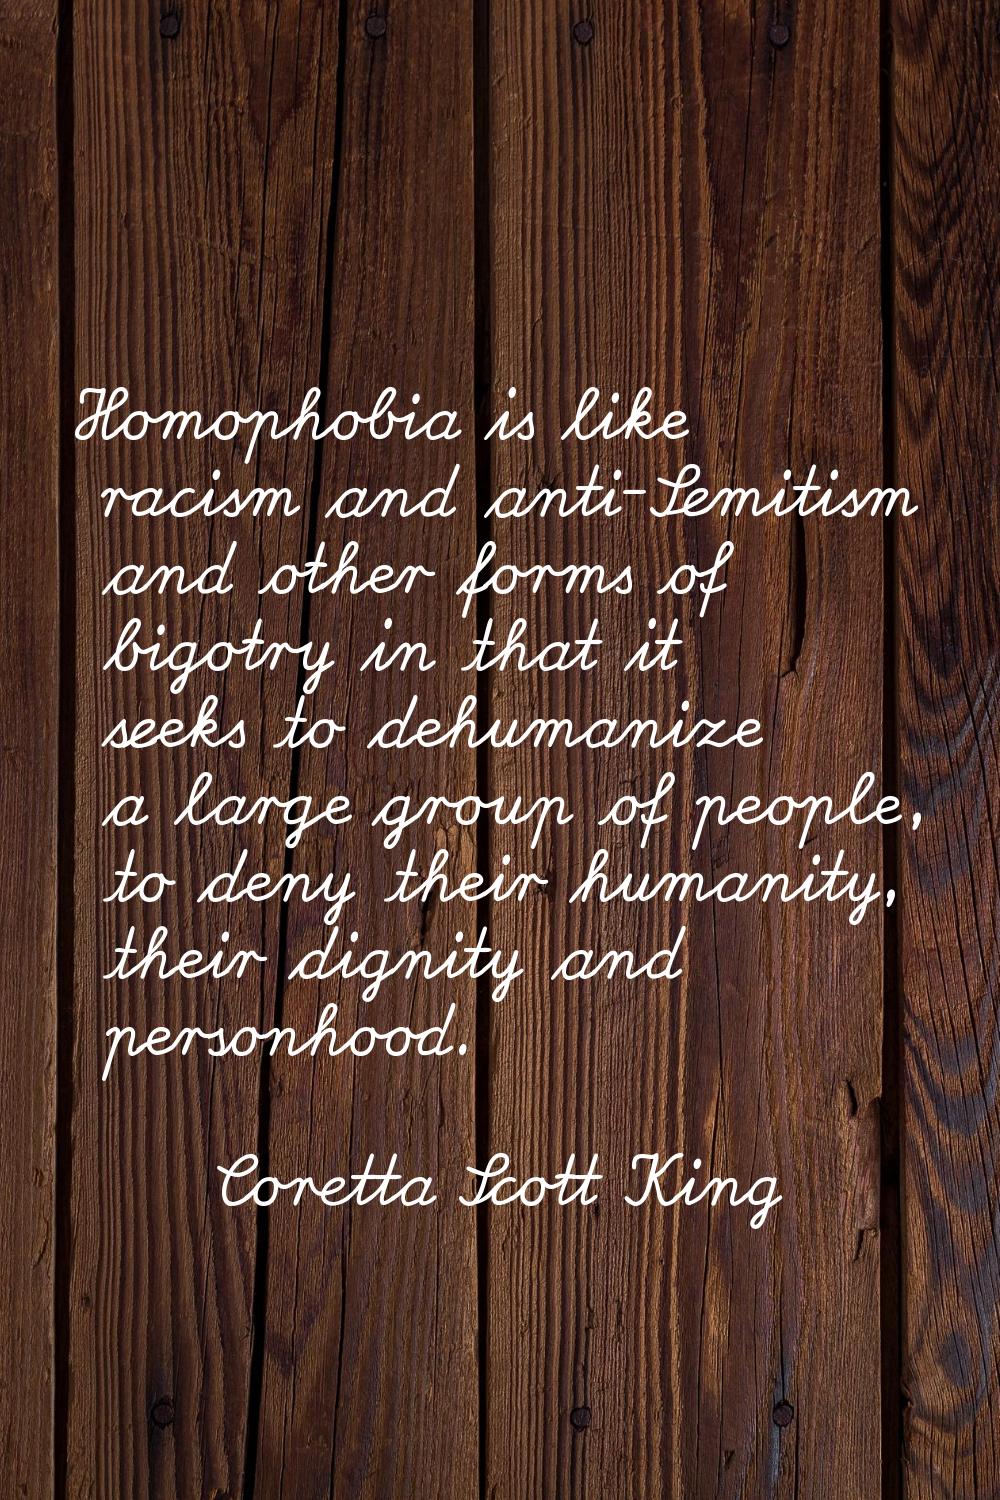 Homophobia is like racism and anti-Semitism and other forms of bigotry in that it seeks to dehumani